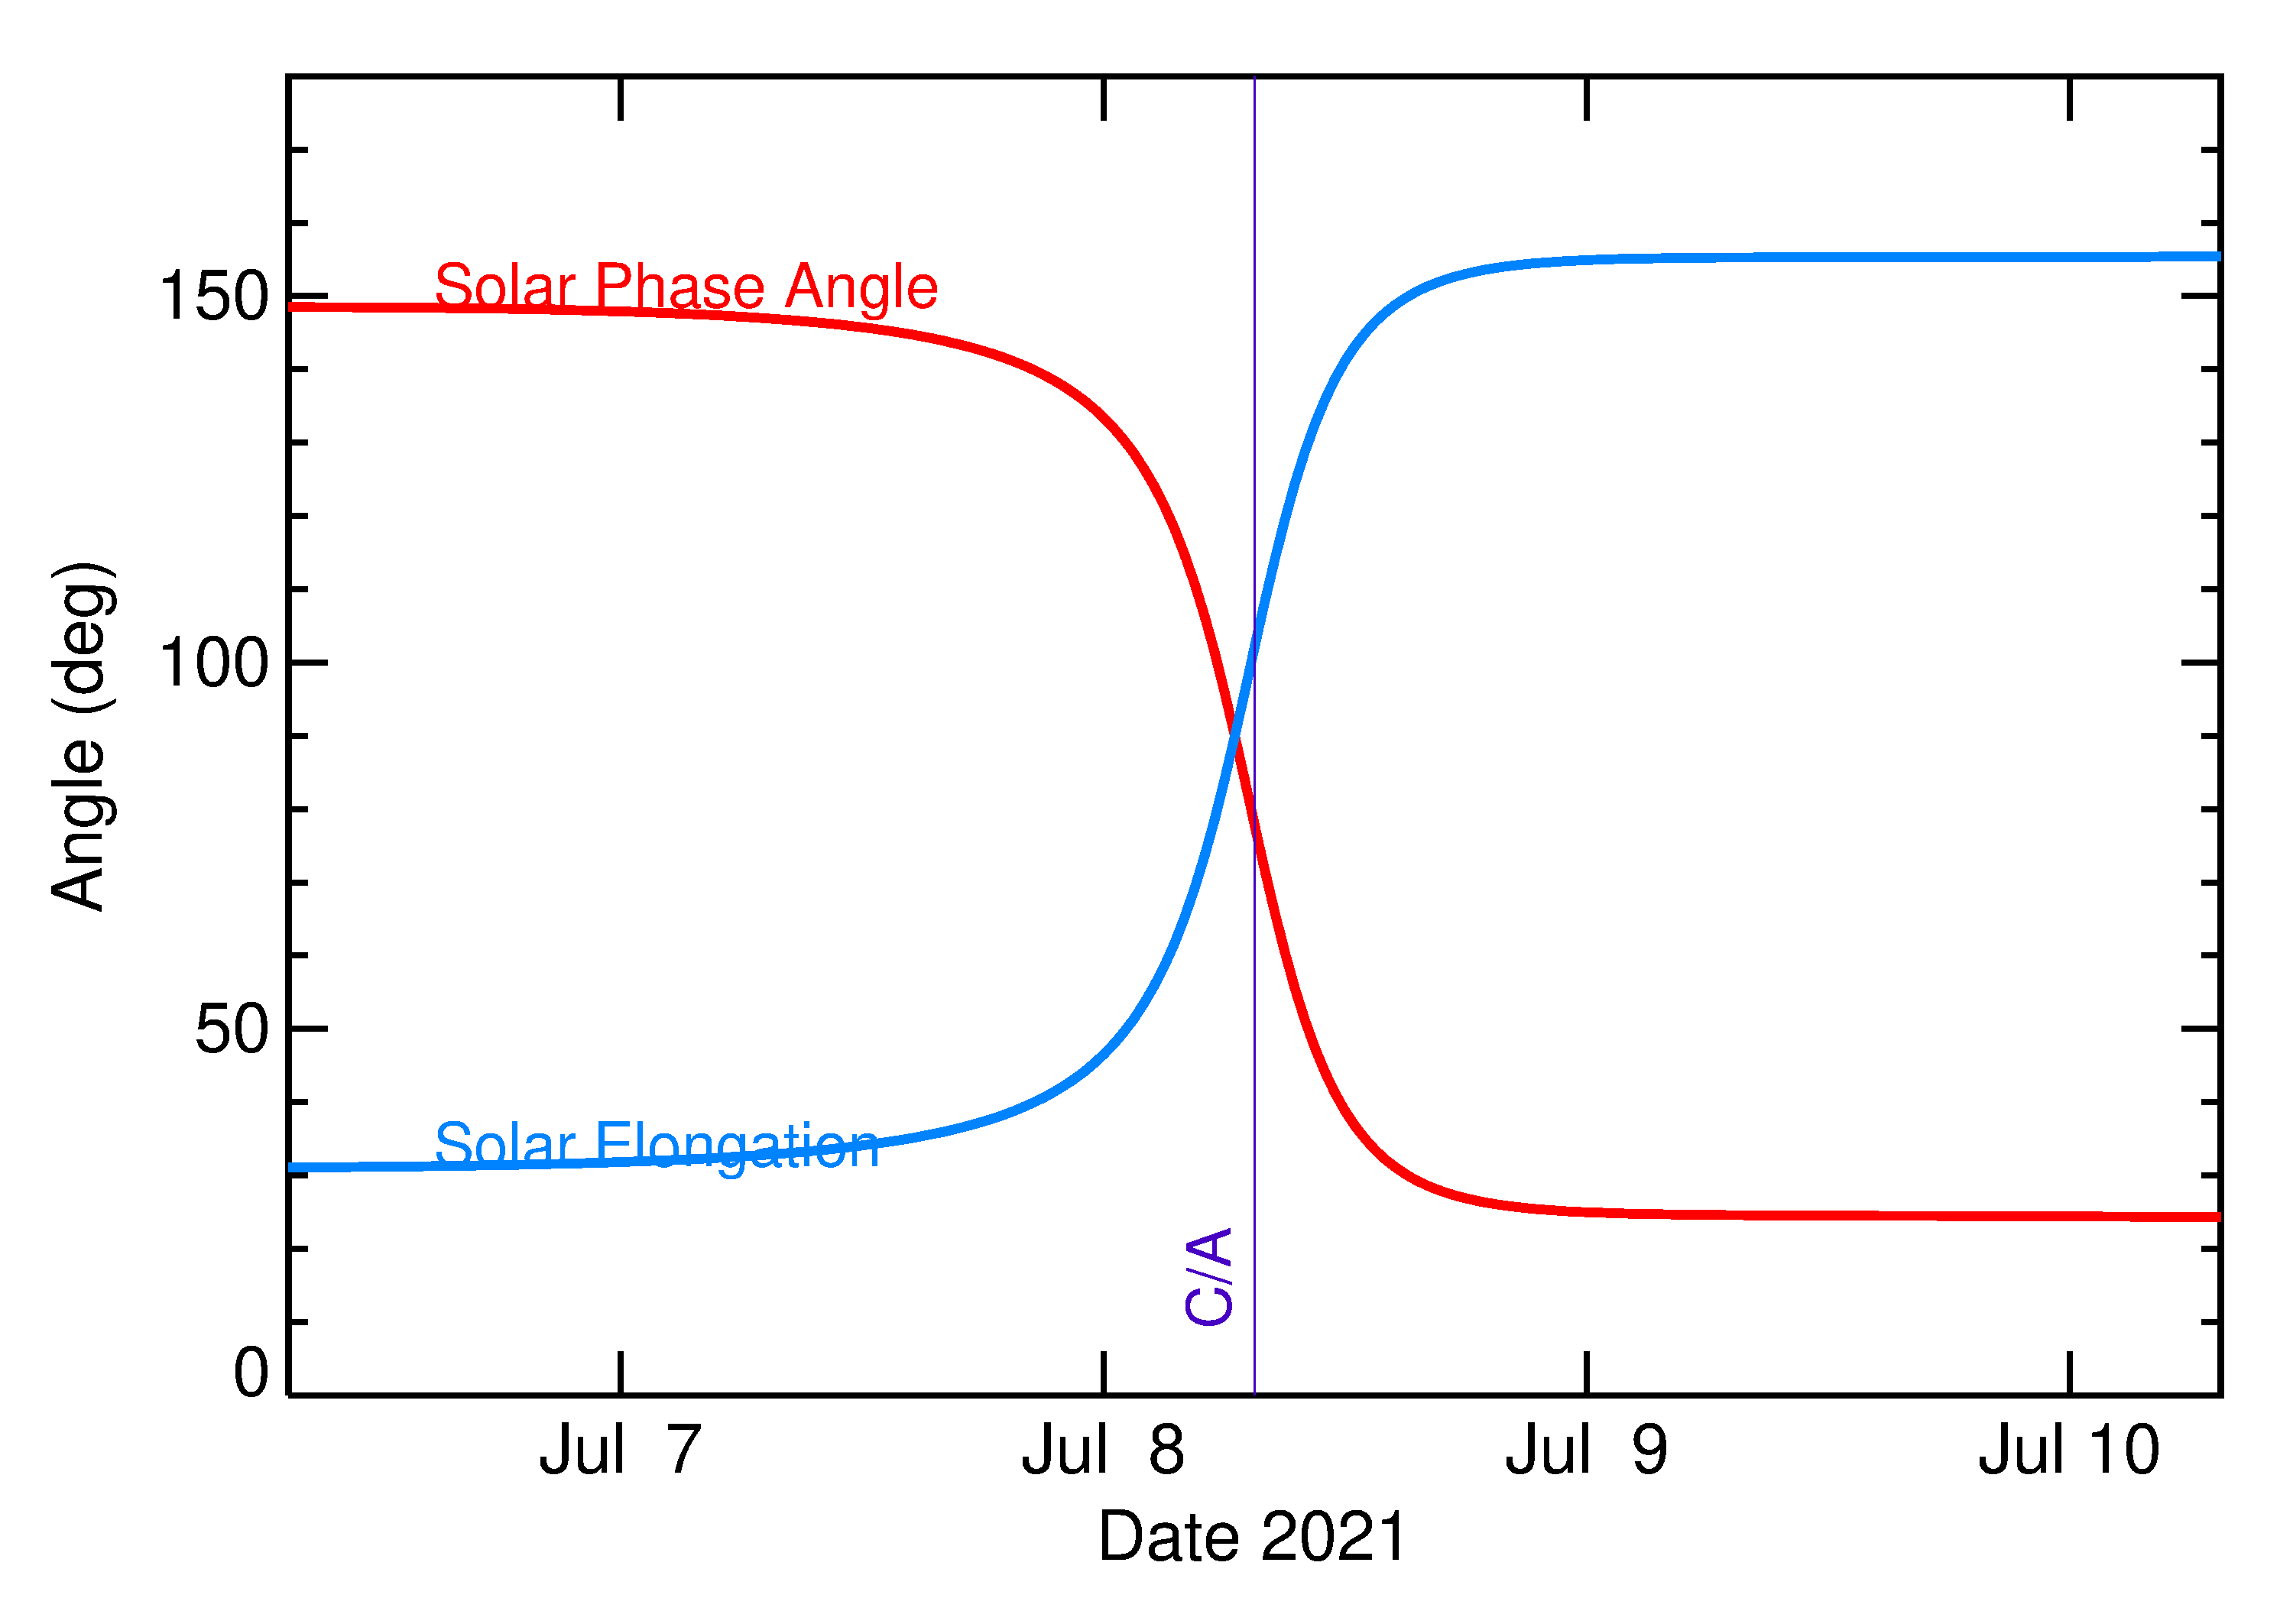 Solar Elongation and Solar Phase Angle of 2021 NU3 in the days around closest approach